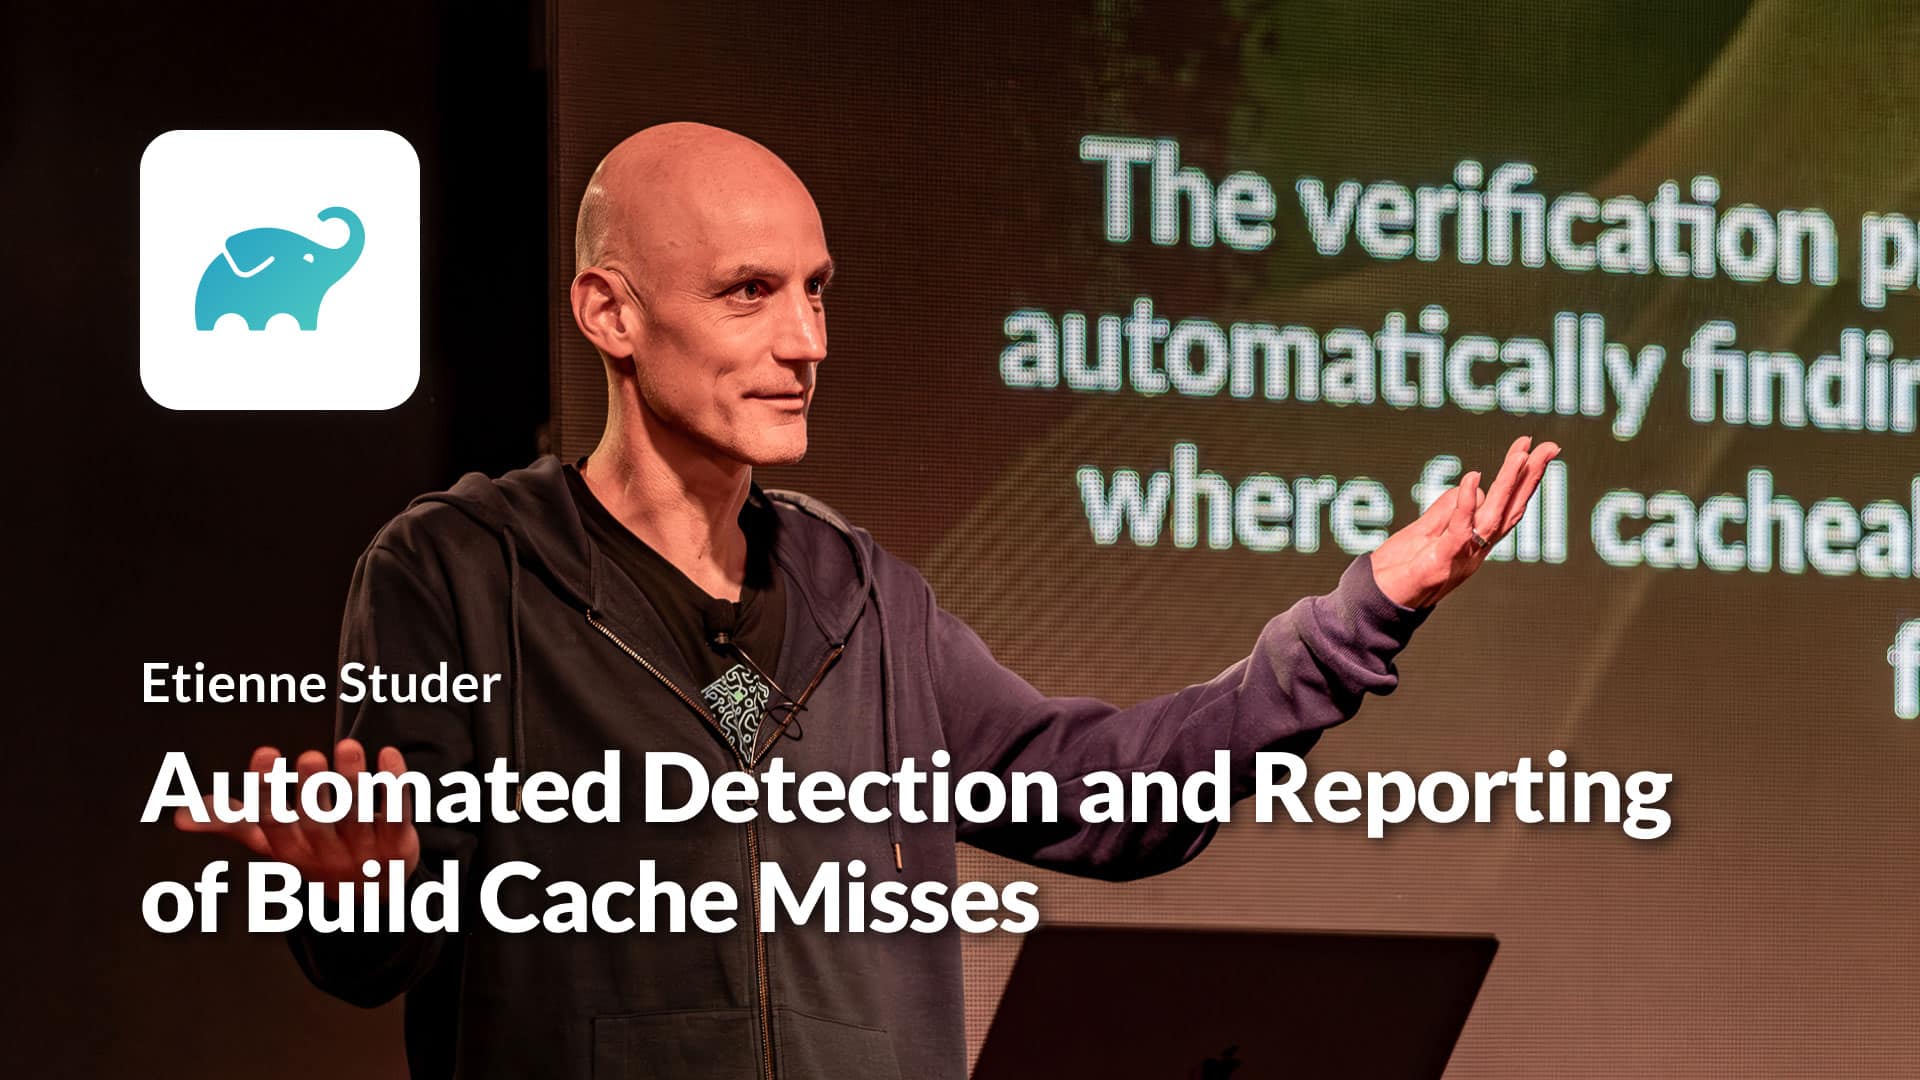 Automated Detection and Reporting of Build Cache Misses